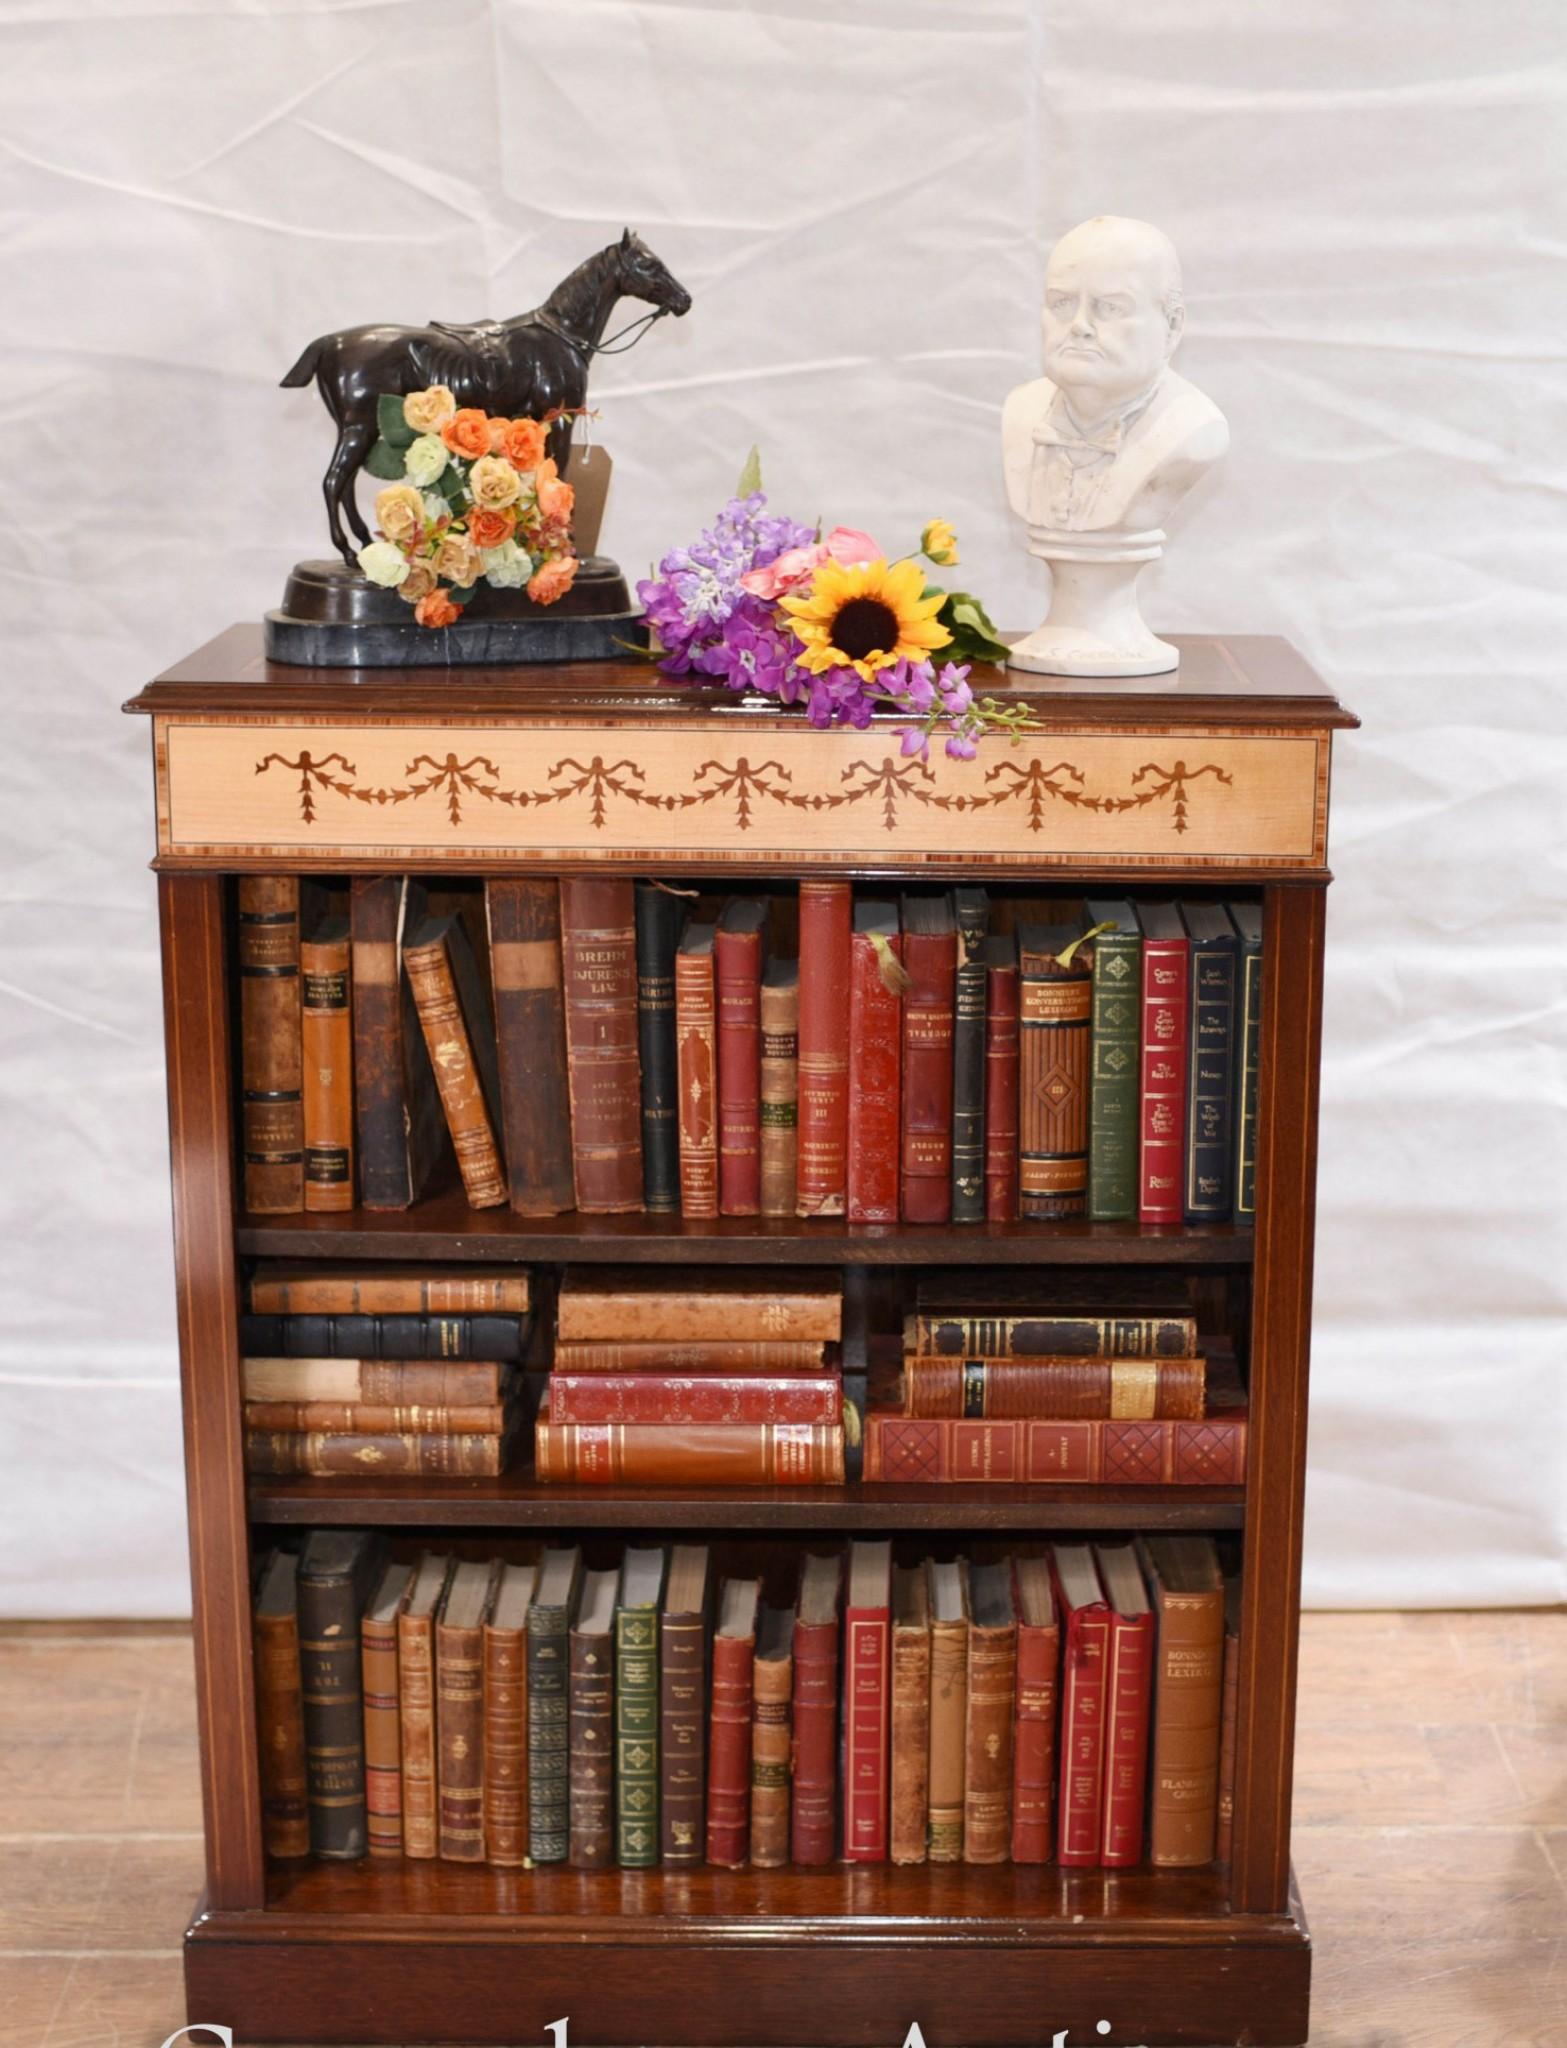 - Gorgeous pair of Regency style open front bookcases
- Classic pair of mahogany bookcases with adjustable shelving
- Hand crafted from mahogany with satinwood inlay work to the top
- Can ship to anywhere in the world, please request for a shipping